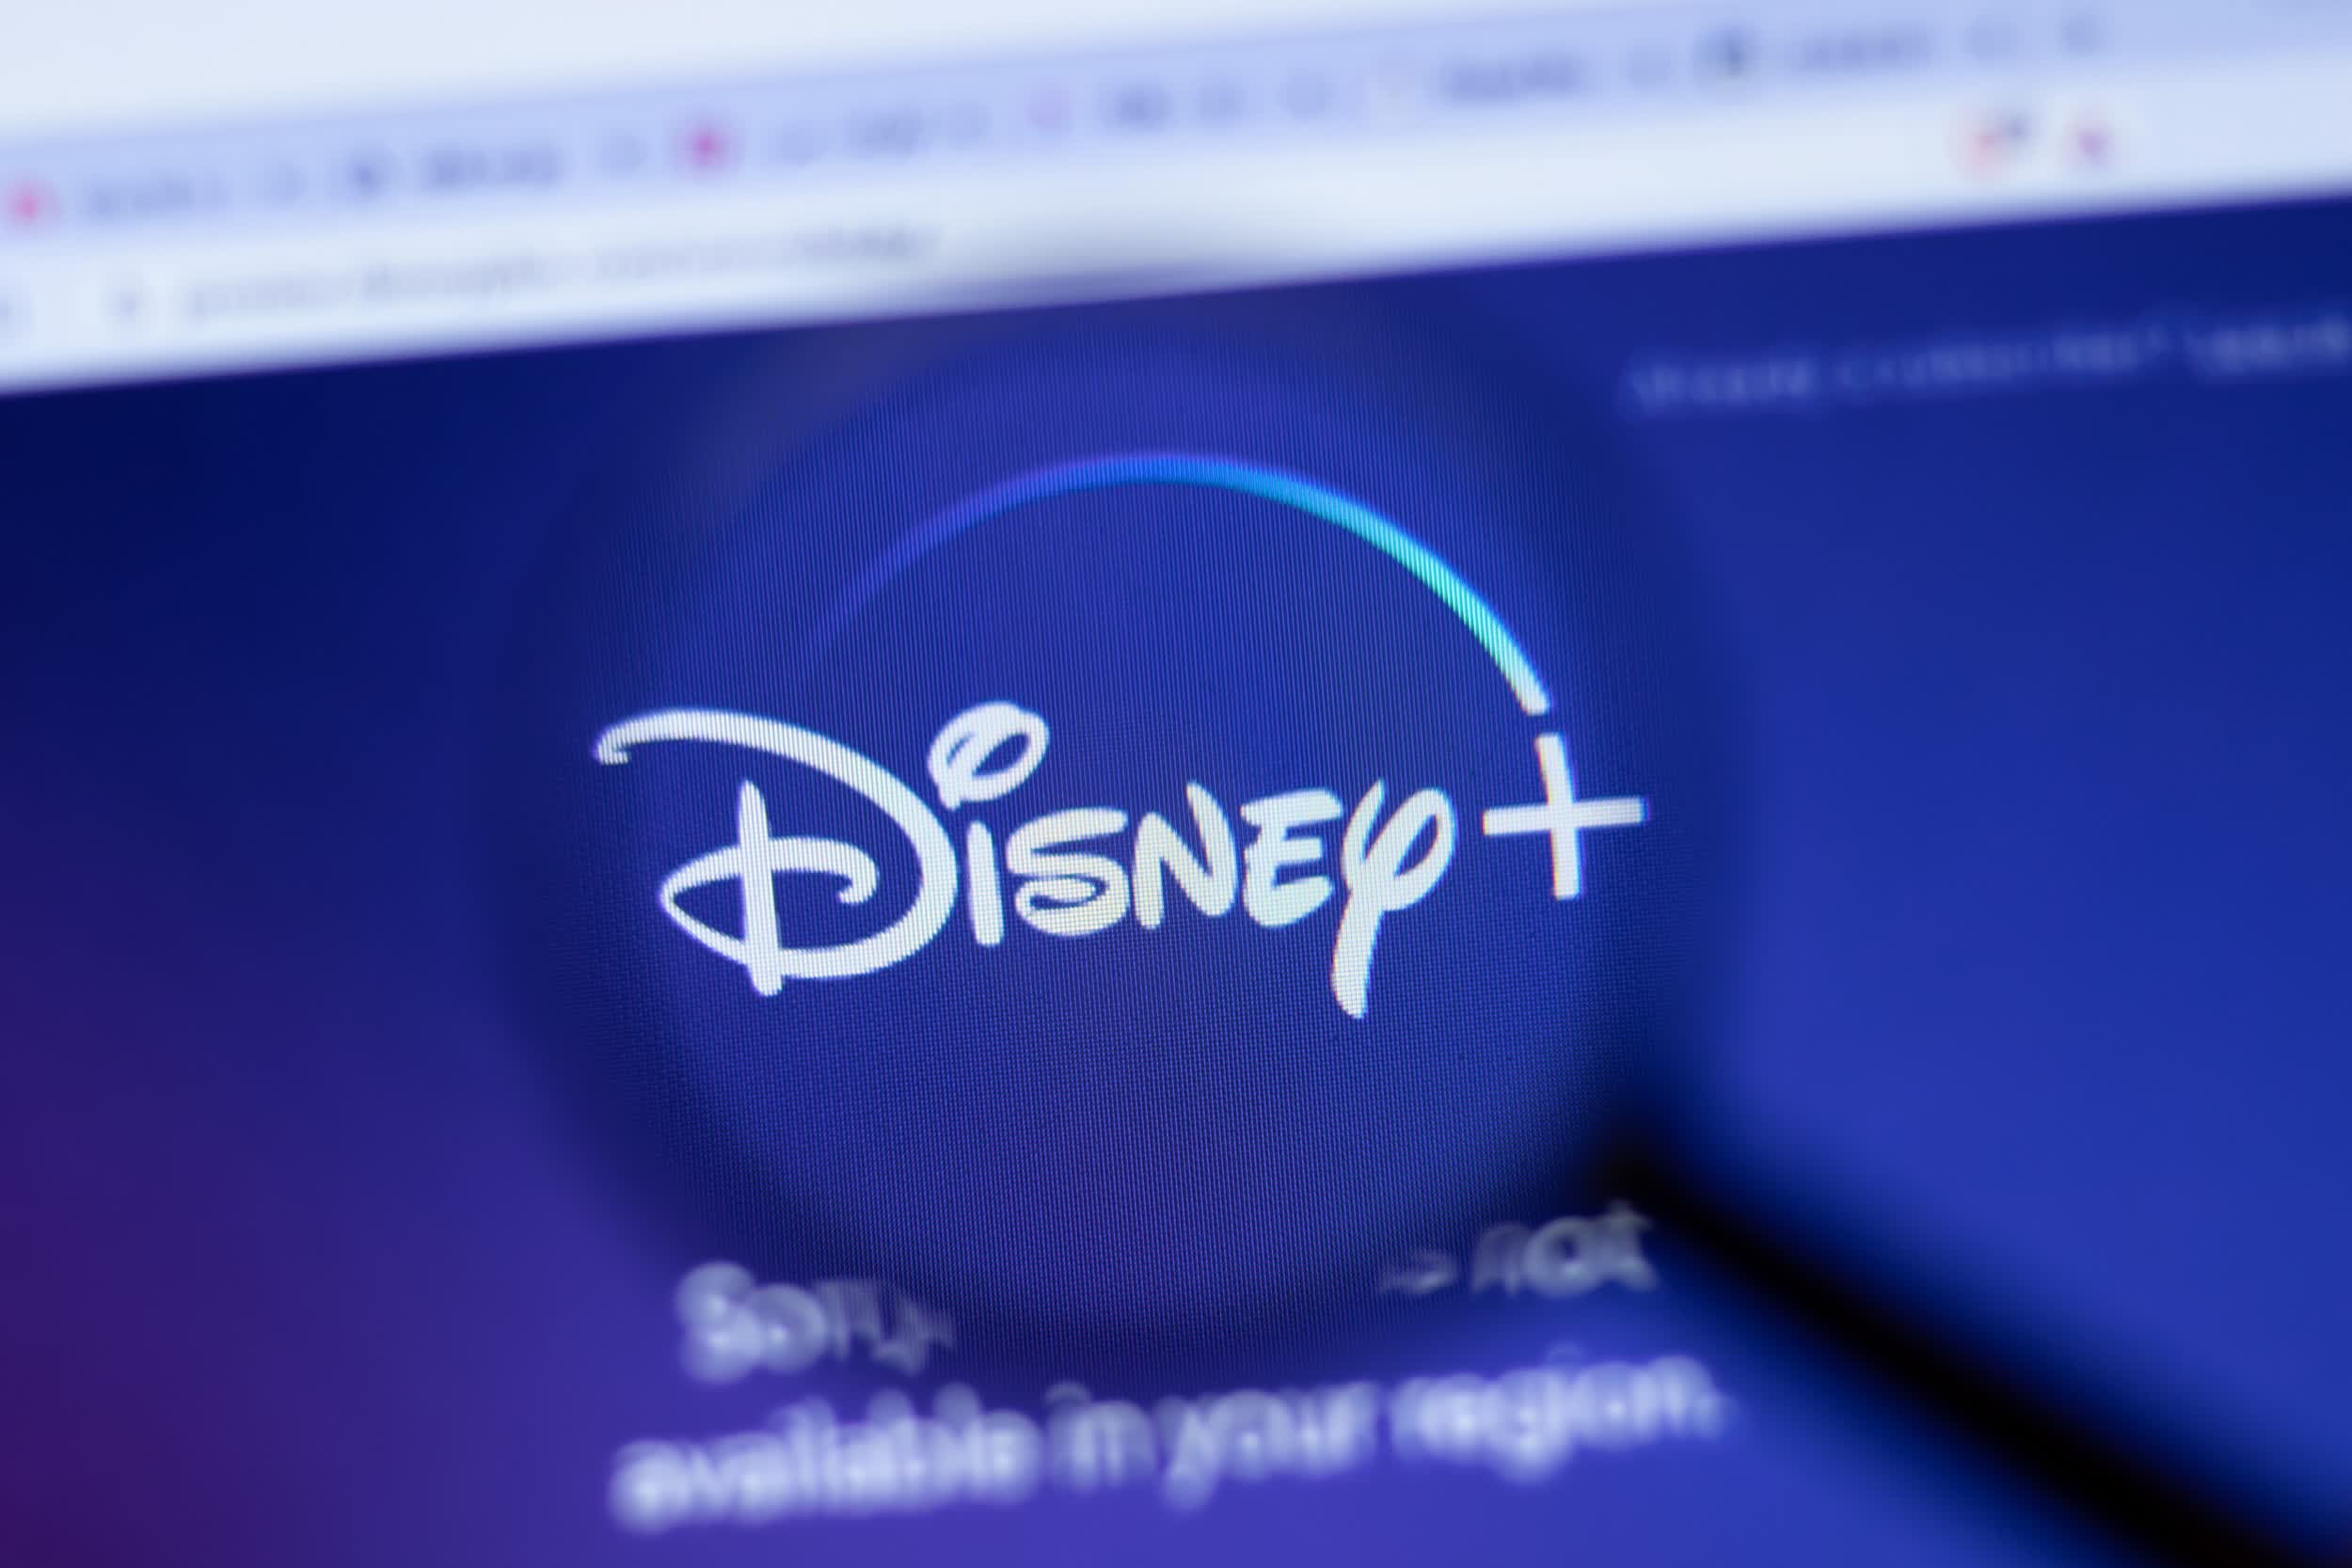 It took Disney+ just 16 months to reach 100 million subscribers